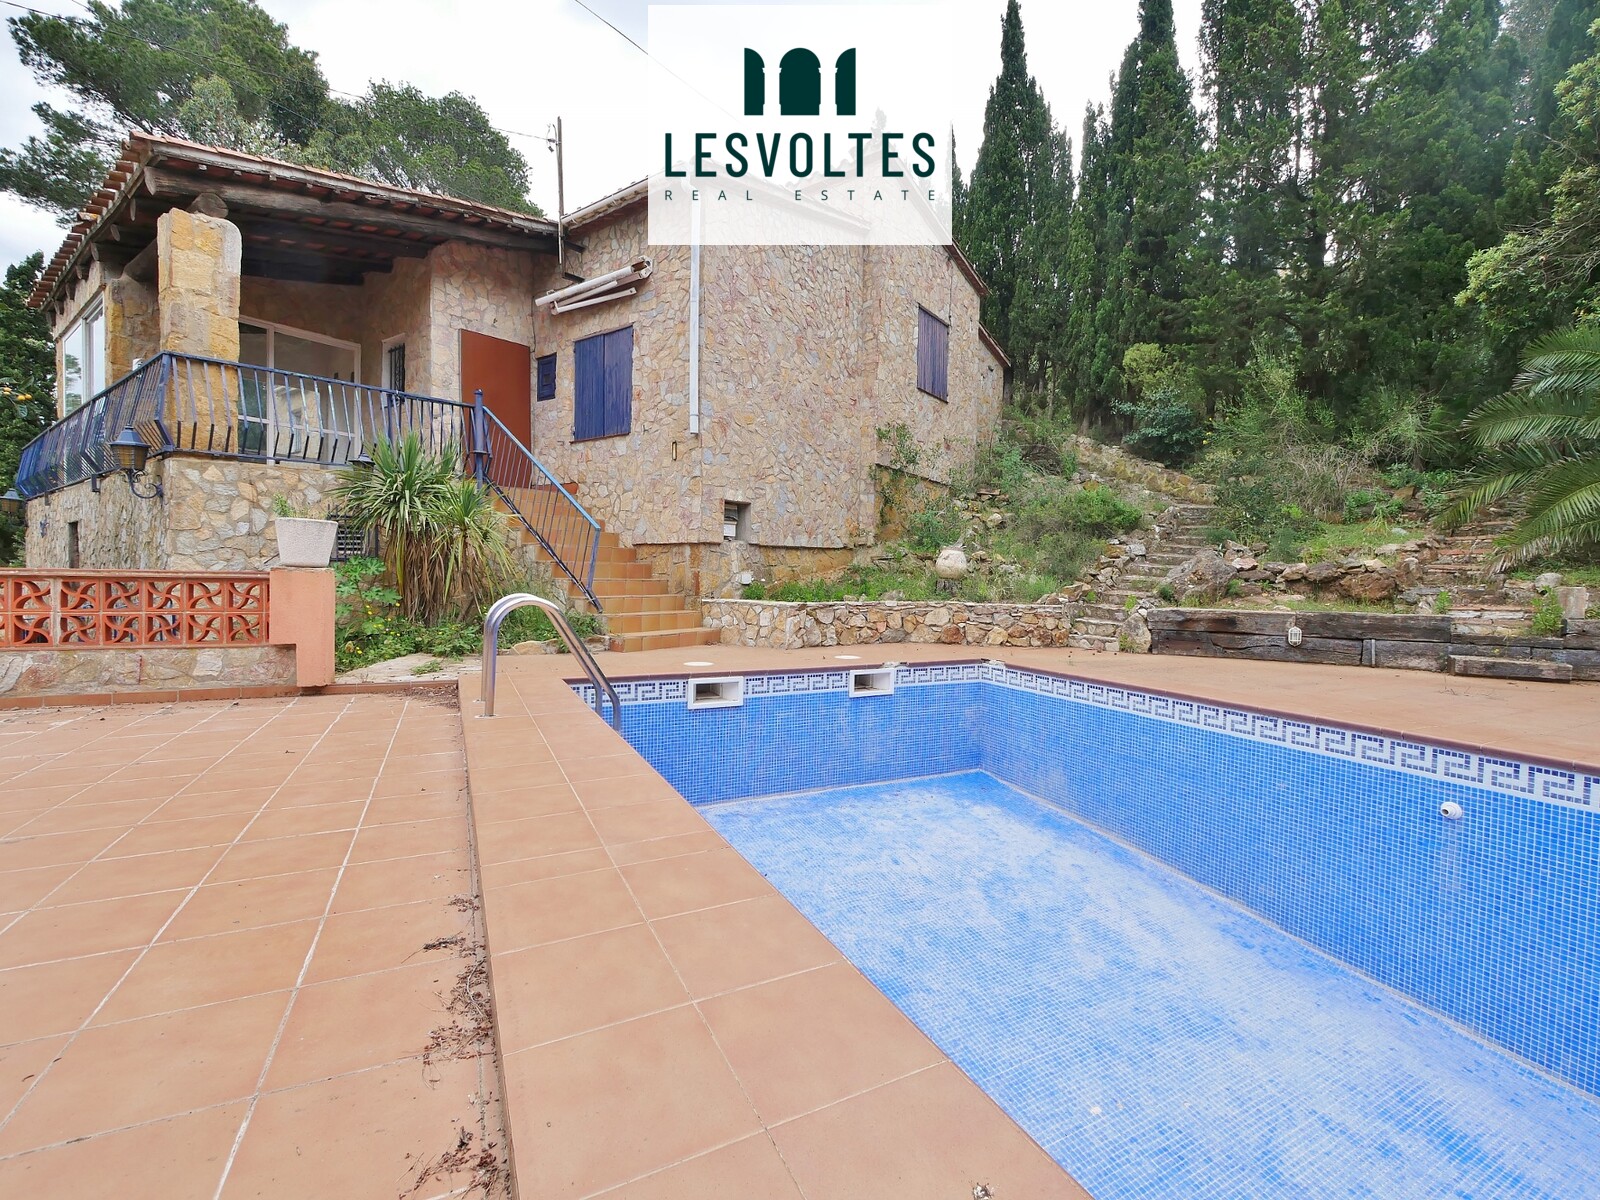 SPACIOUS HOUSE WITH GARDEN AND SWIMMING POOL LOCATED IN RESIDENCIAL BEGUR